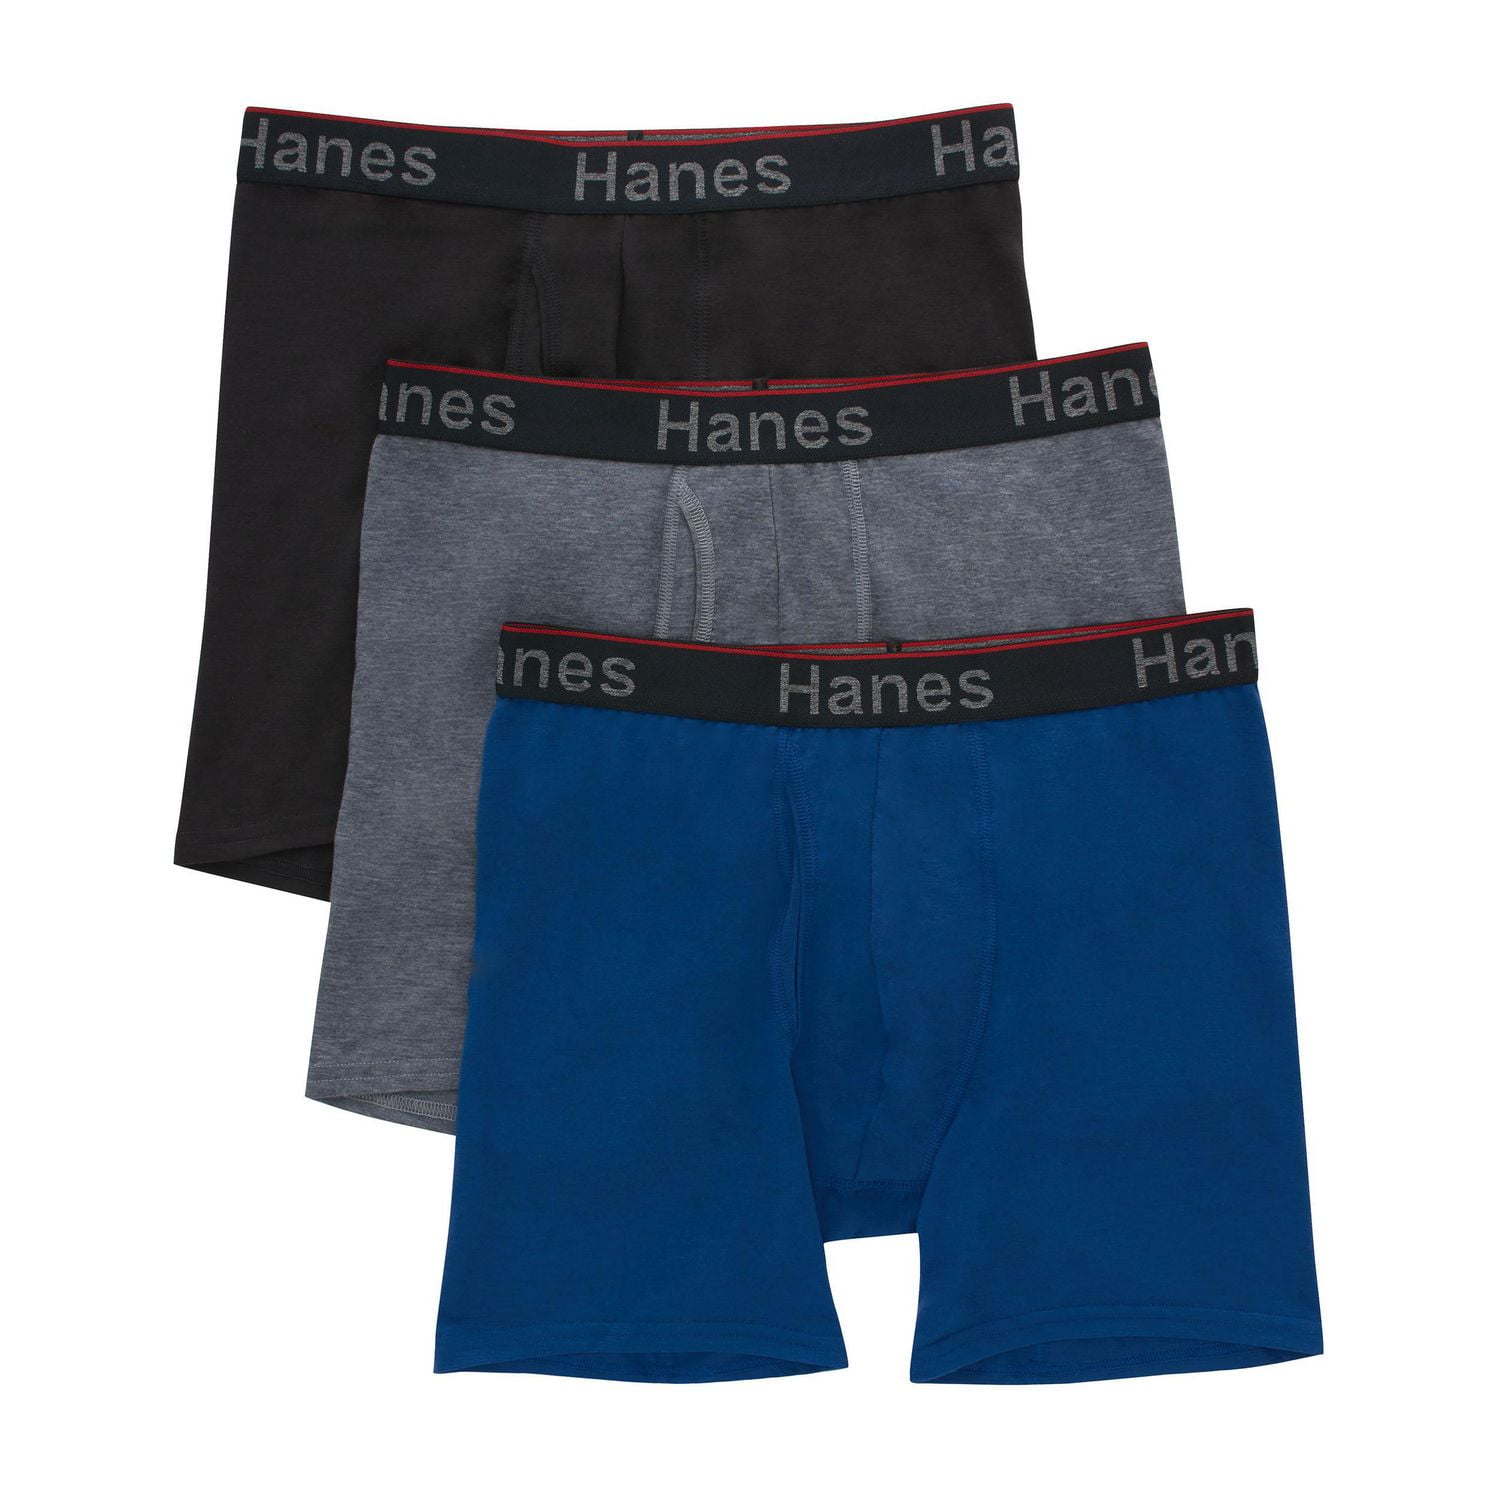 Hanes Men's X-temp Total Support Pouch Support Pouch 3-pack Trunks, Men's  Underwear